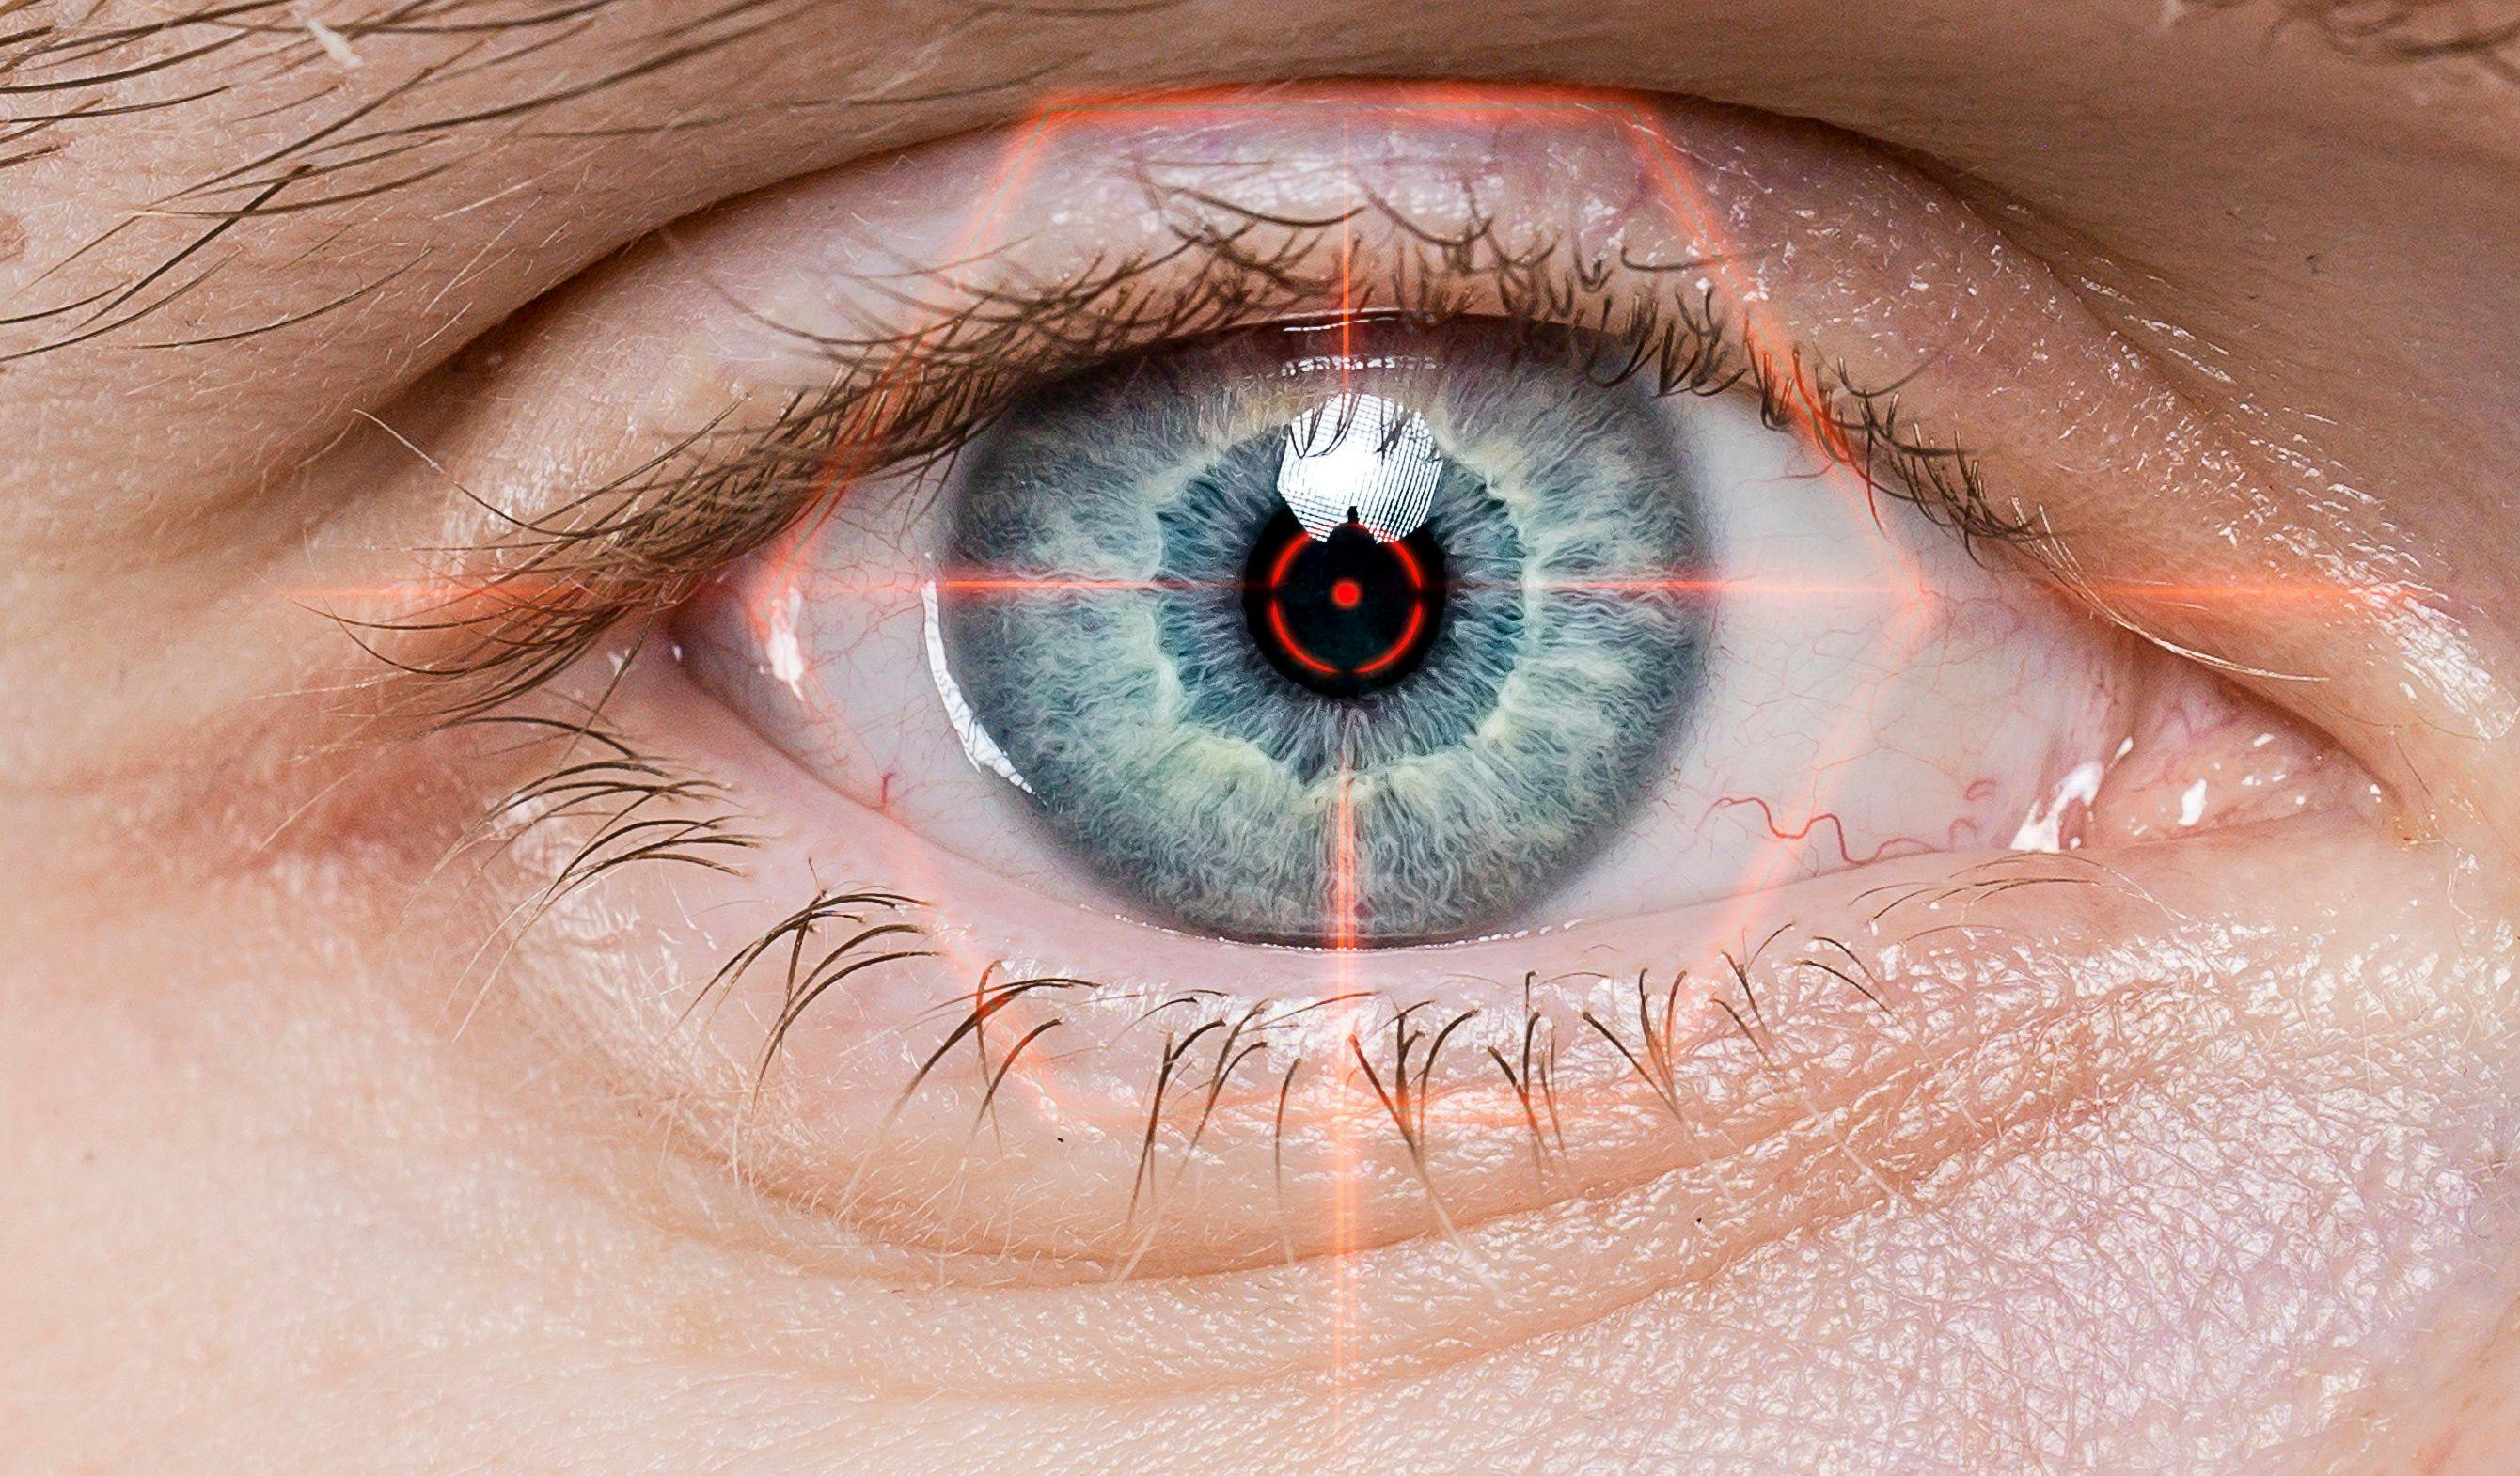 Long-acting PAS-nomacopan is in pre-clinical development as a treatment for GA that addresses areas of significant unmet patient need including a long dose interval and reduction in the risk of choroidal neovascularization. (Adobe Stock image)